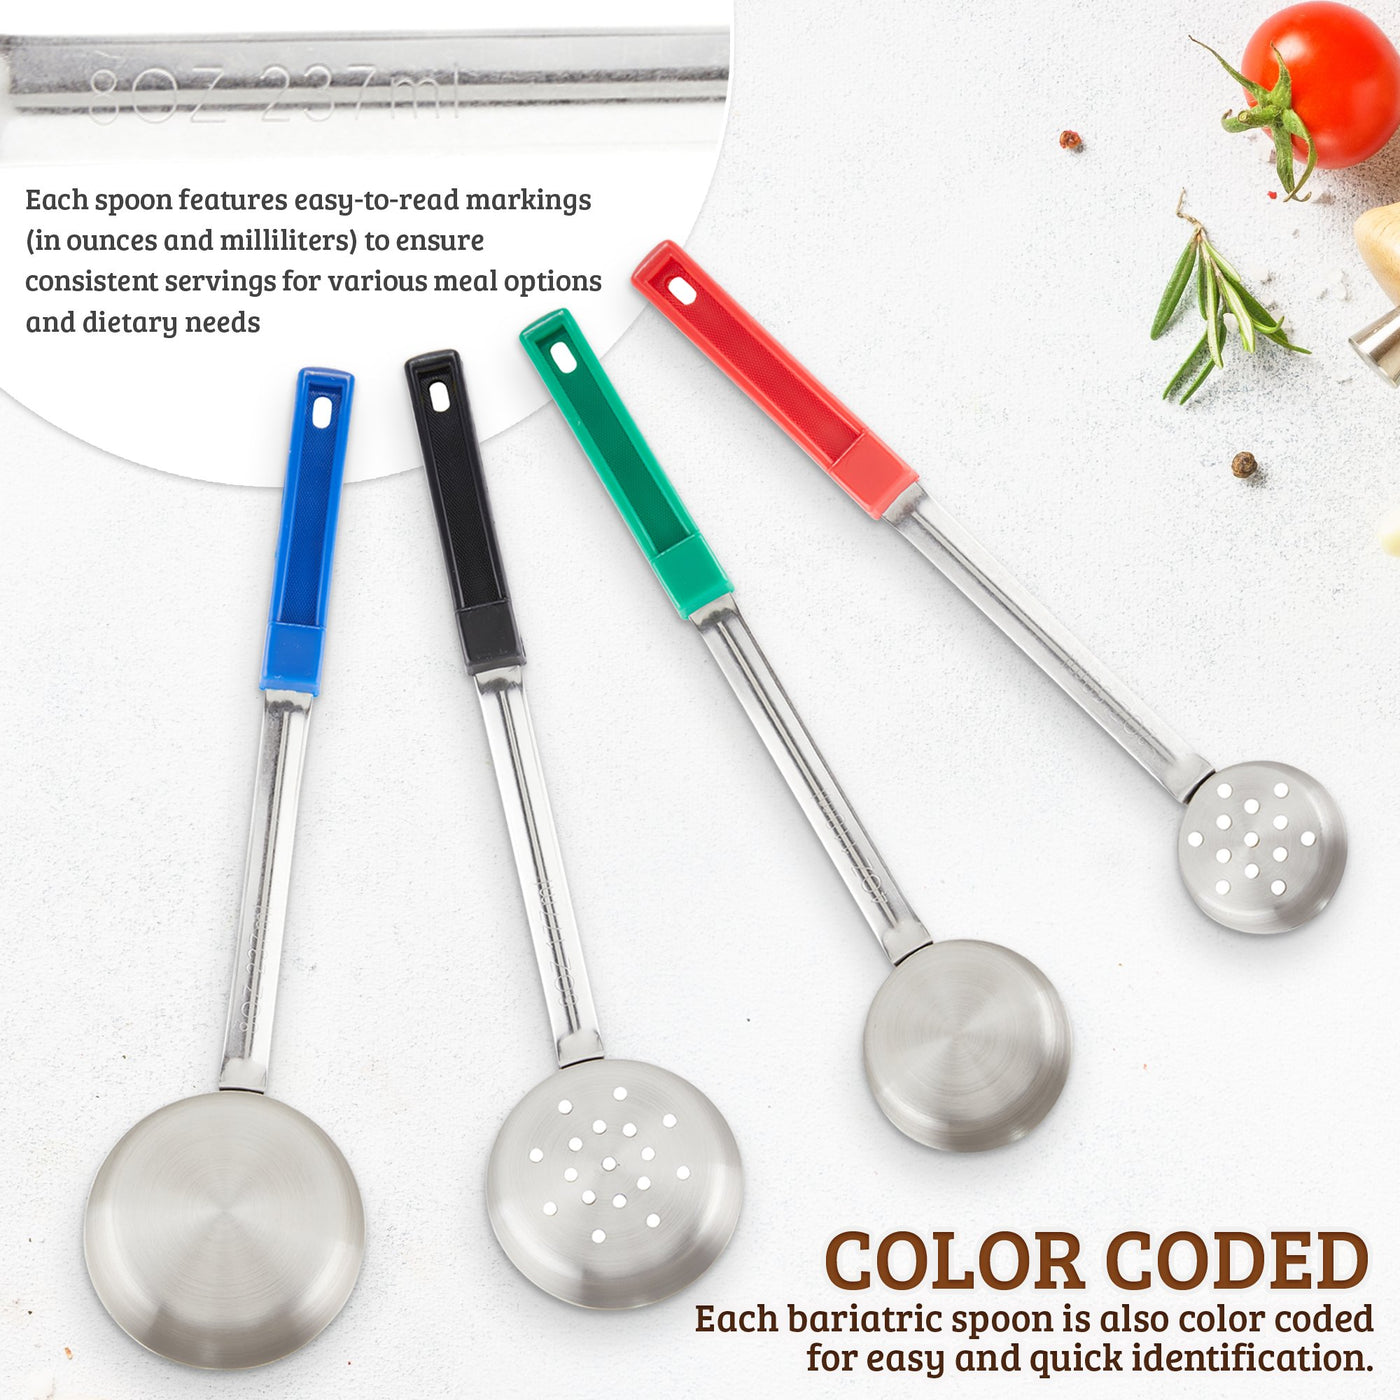 Portion Control Serving Spoon Kitchen Utensils For Portion Control